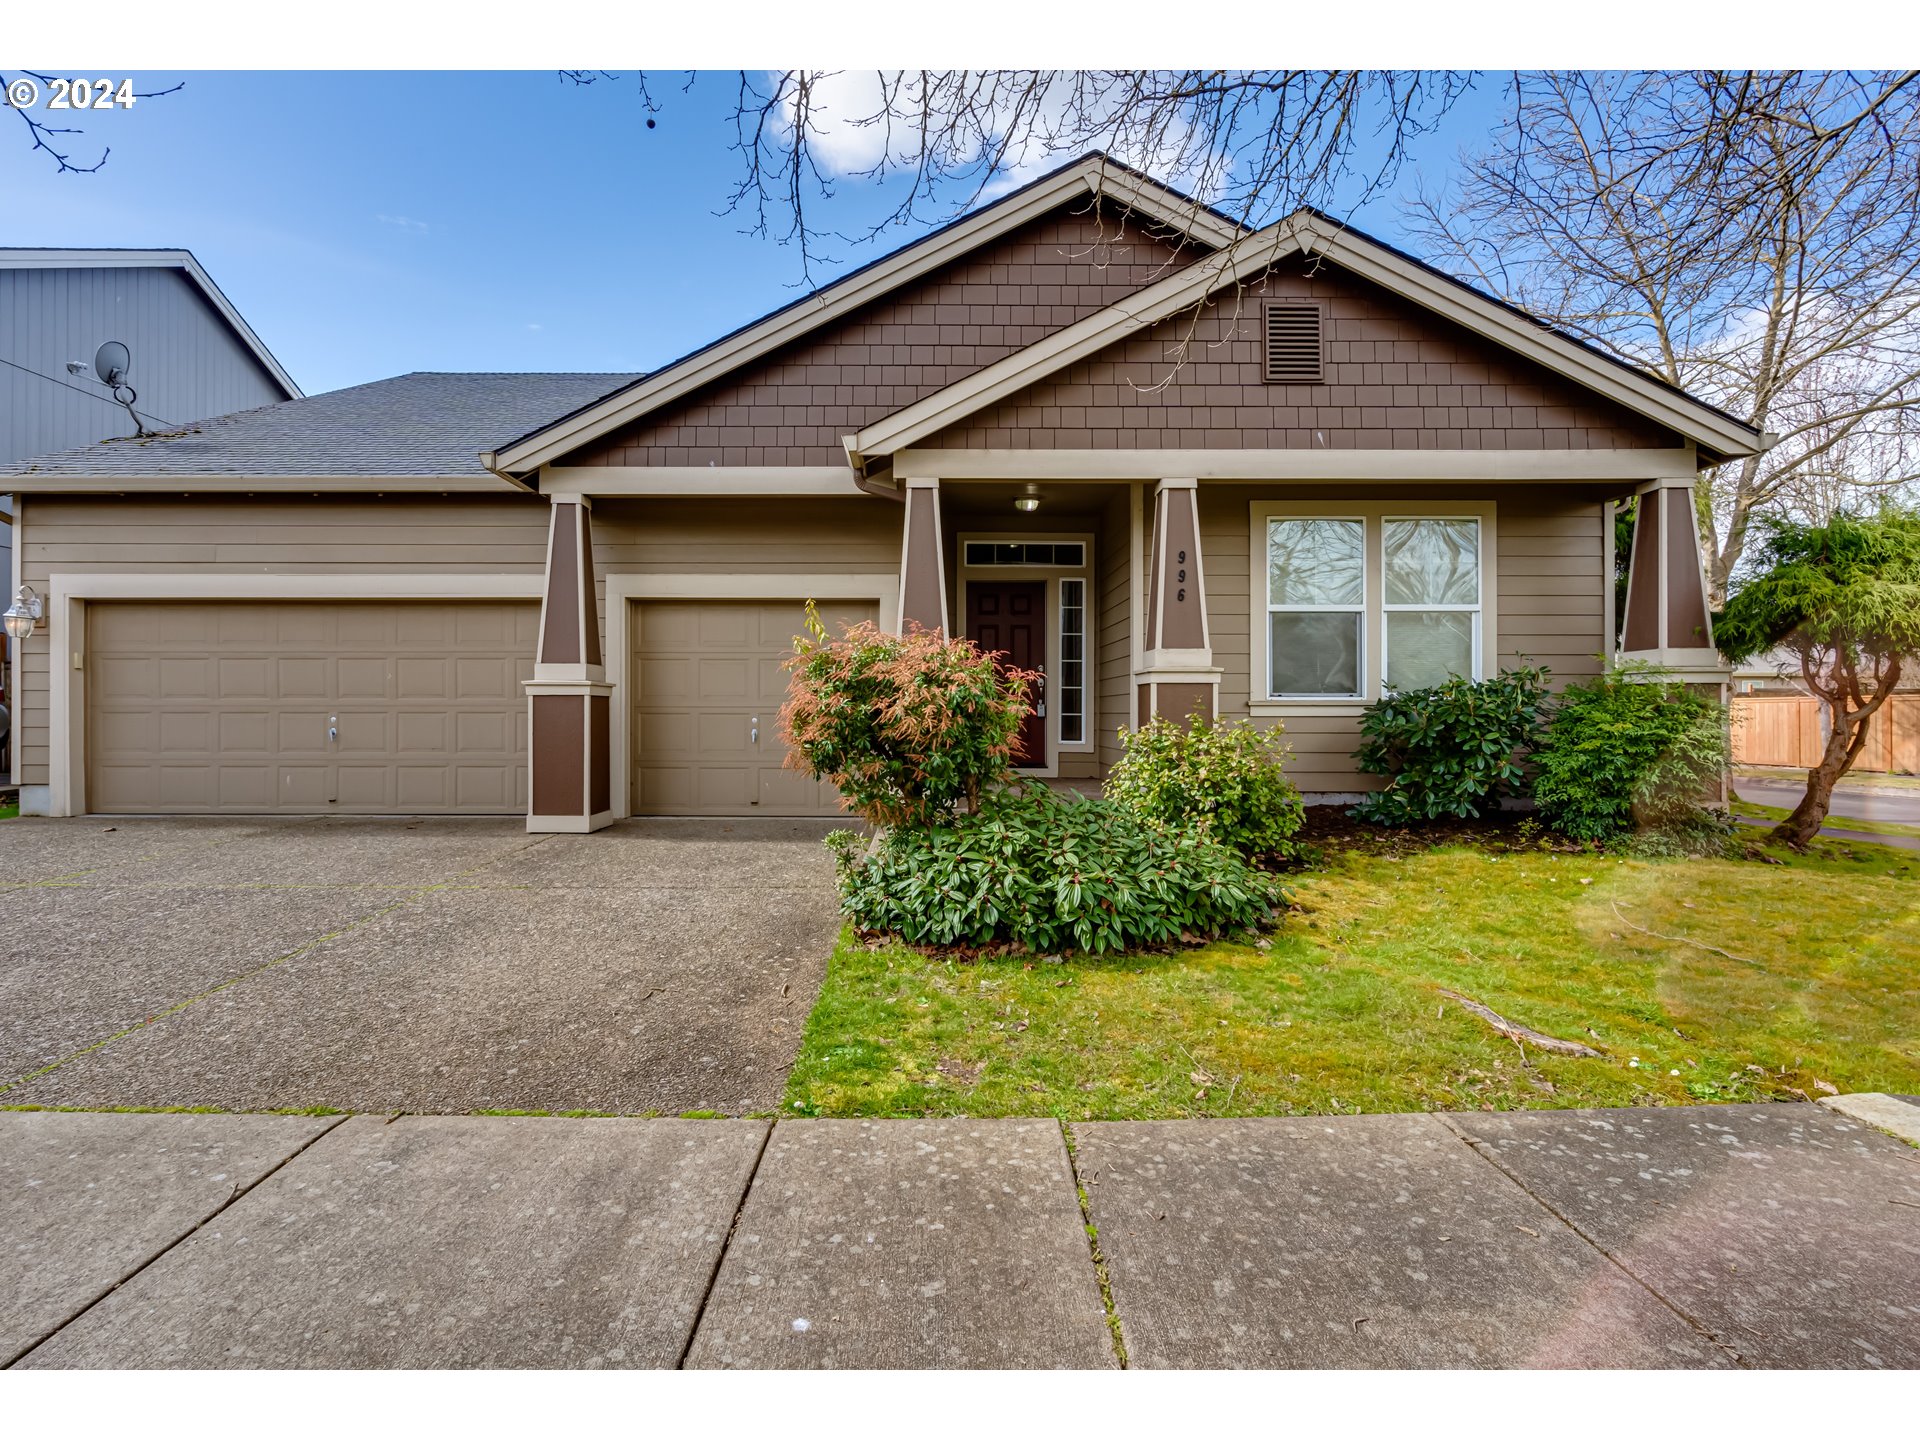 996 HOLLOW WAY, Eugene, OR 97402